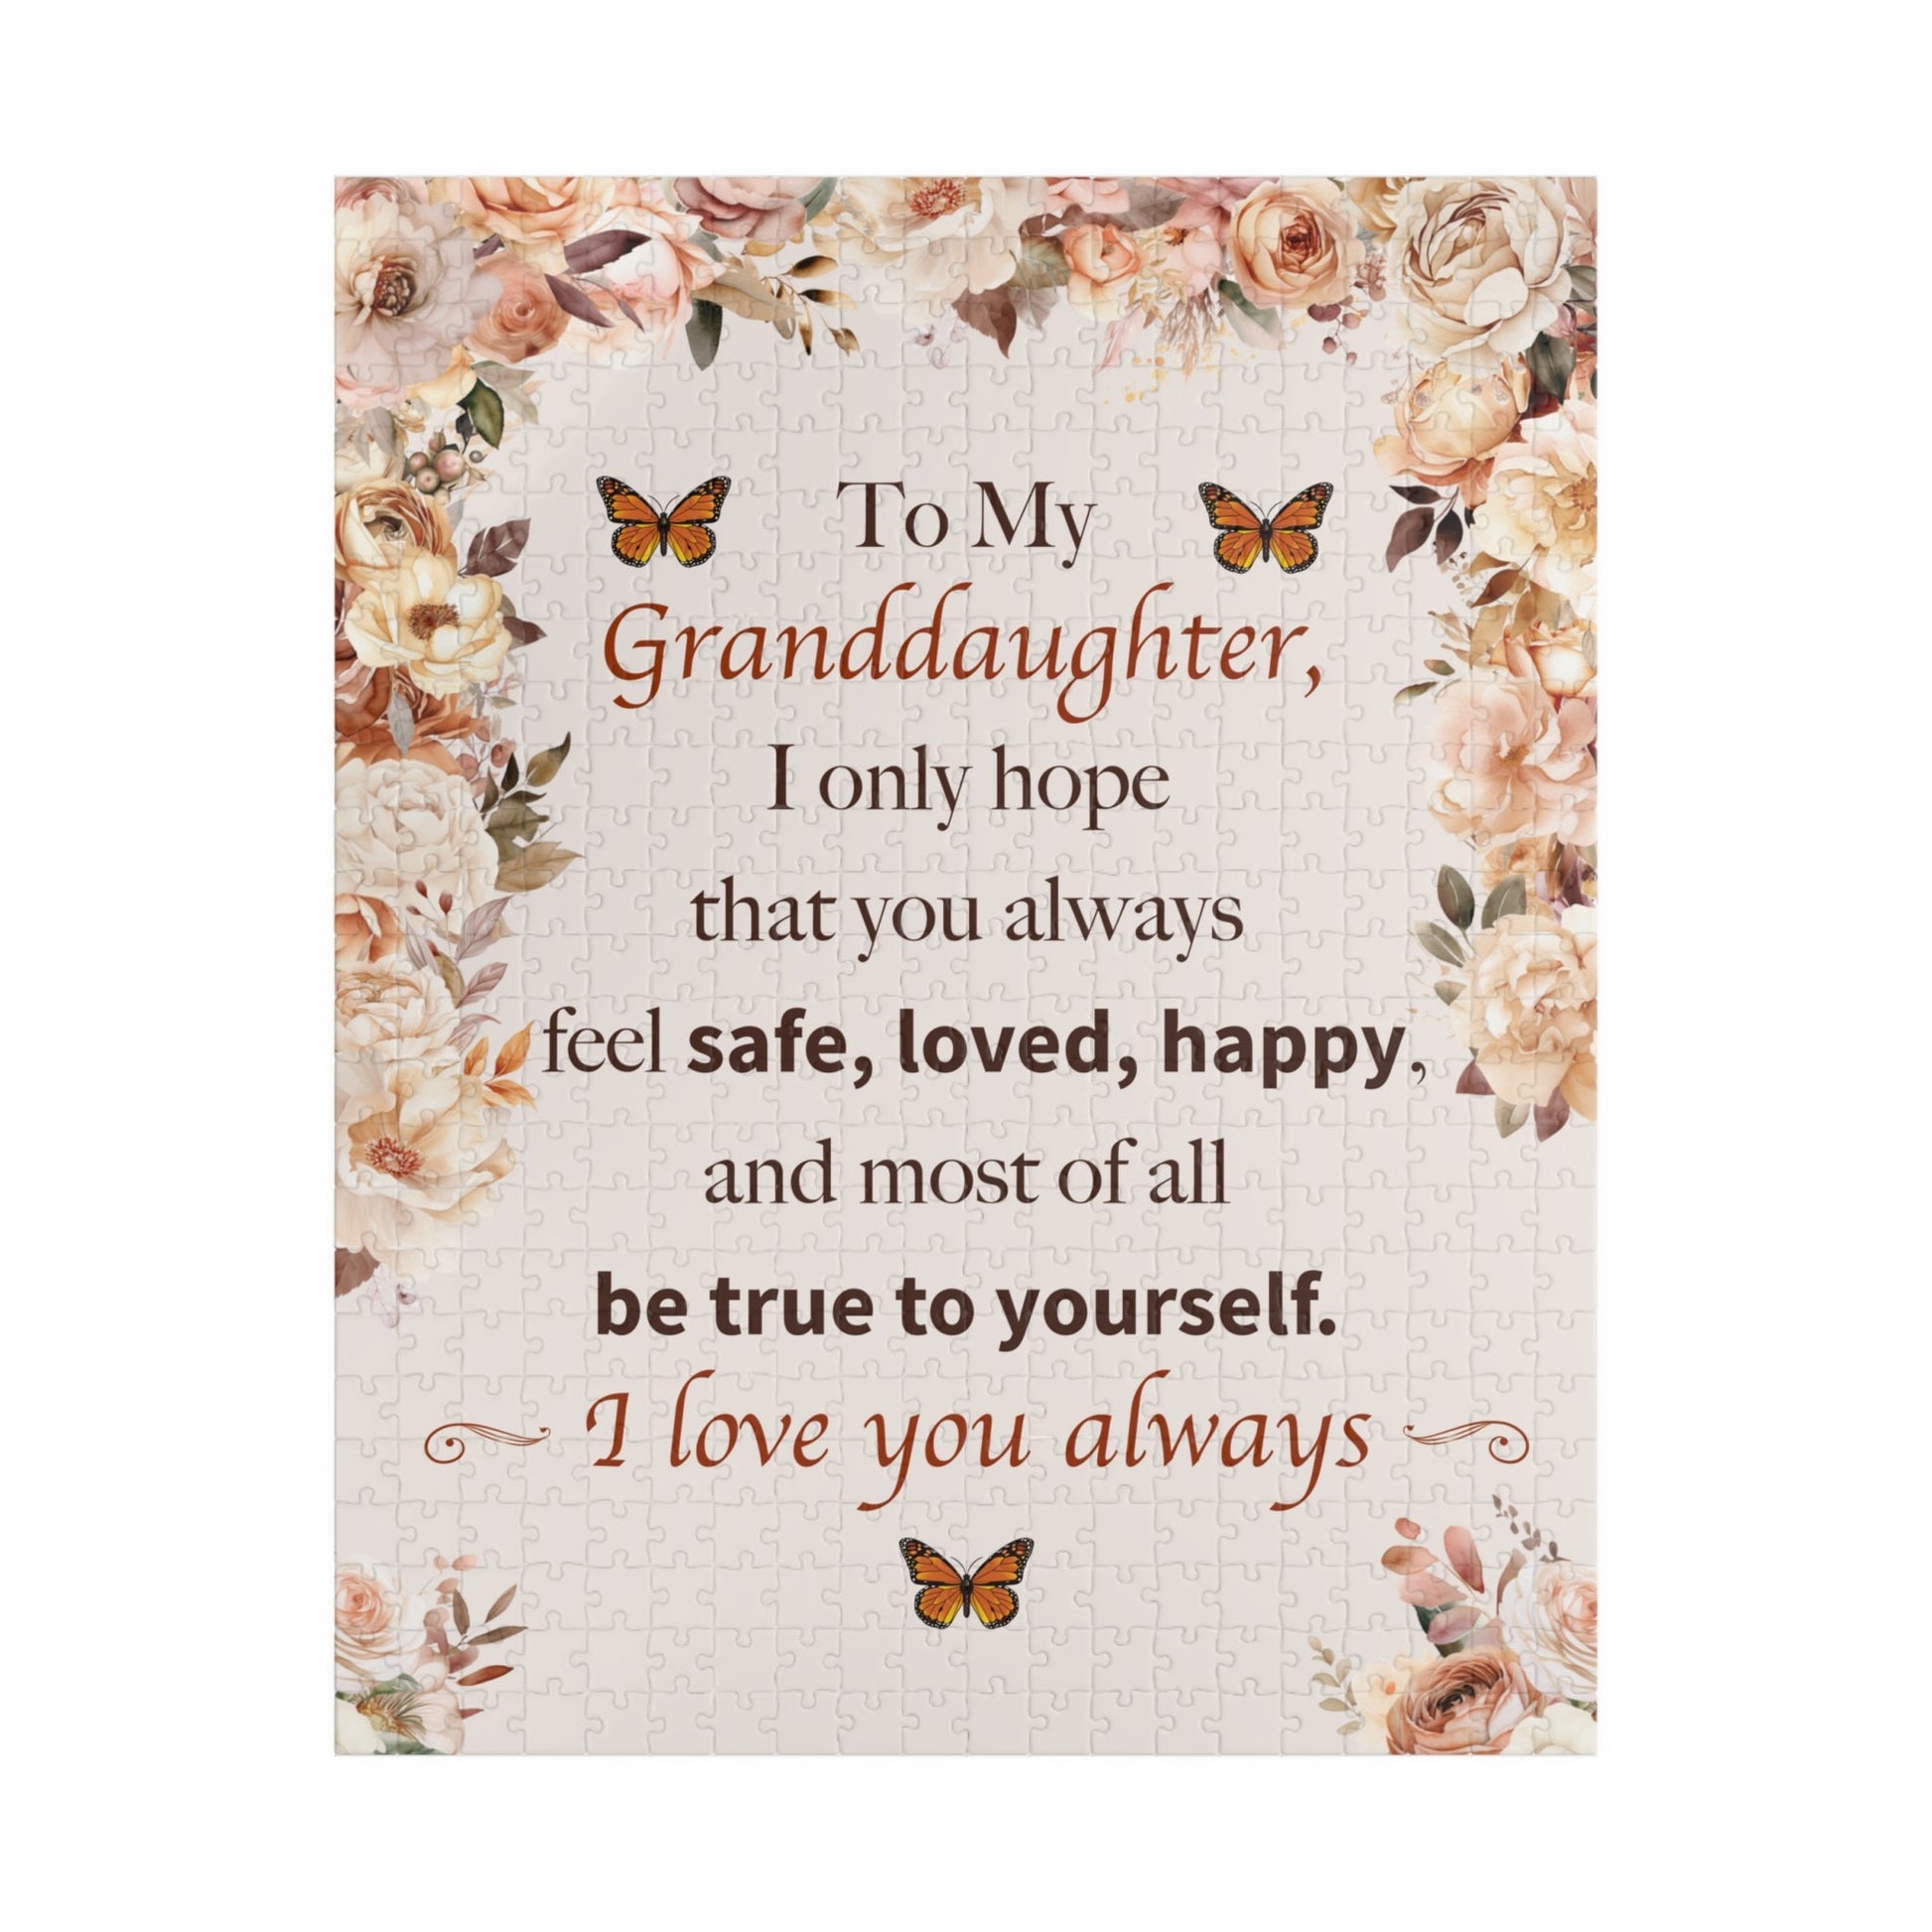 Granddaughter I Love You Puzzle - 520 pcs (Vertical)